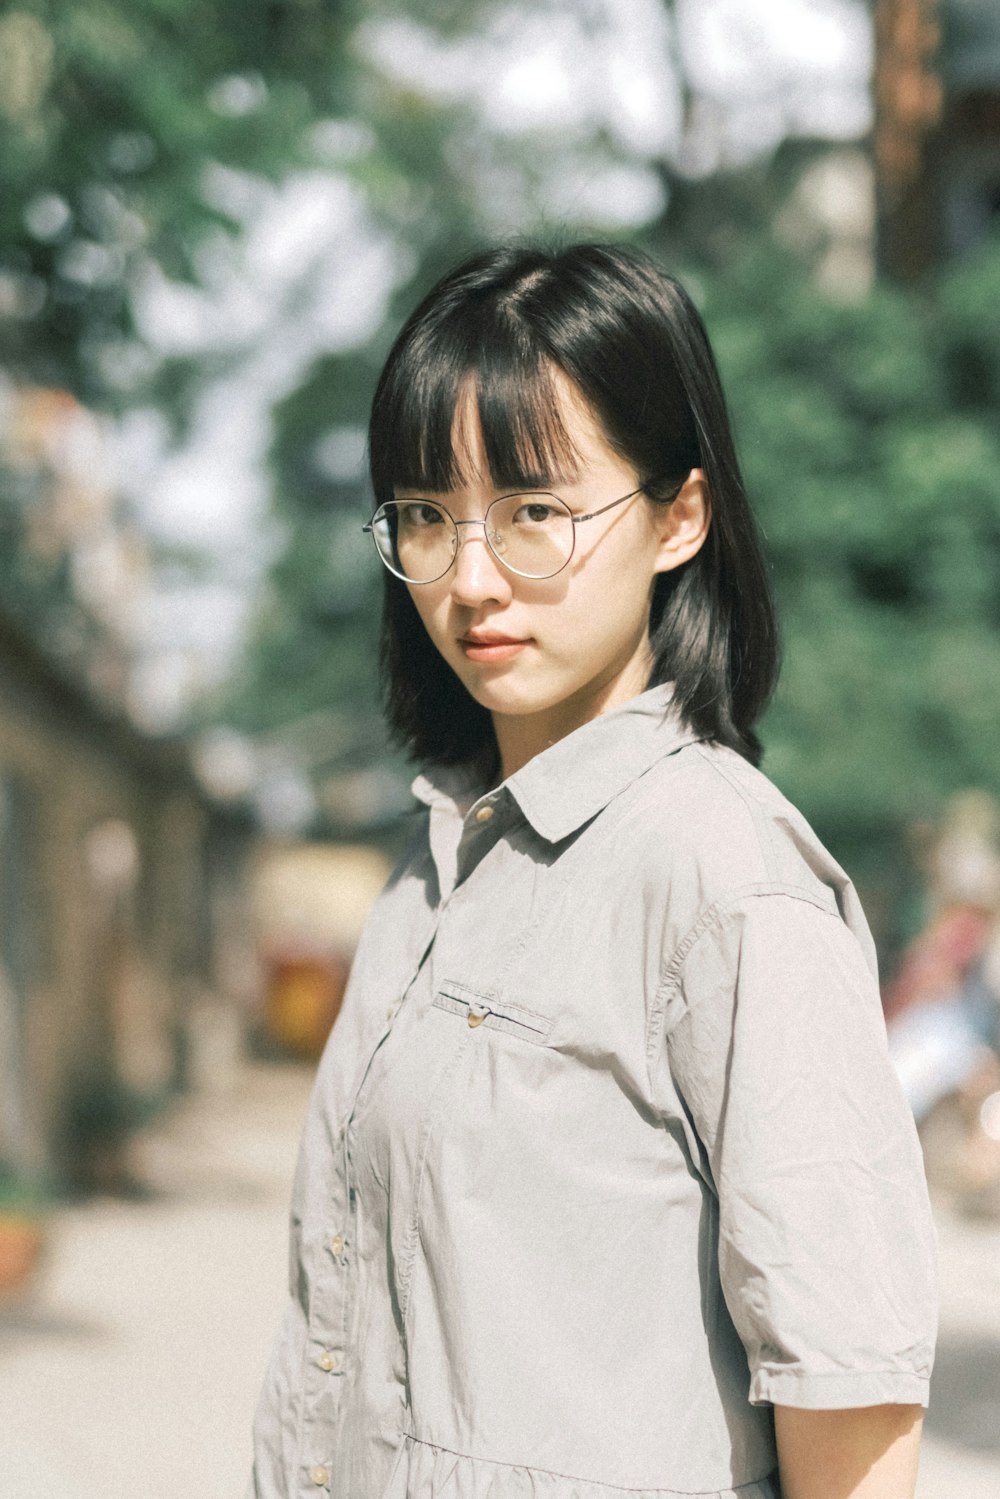 a woman with glasses standing on a street